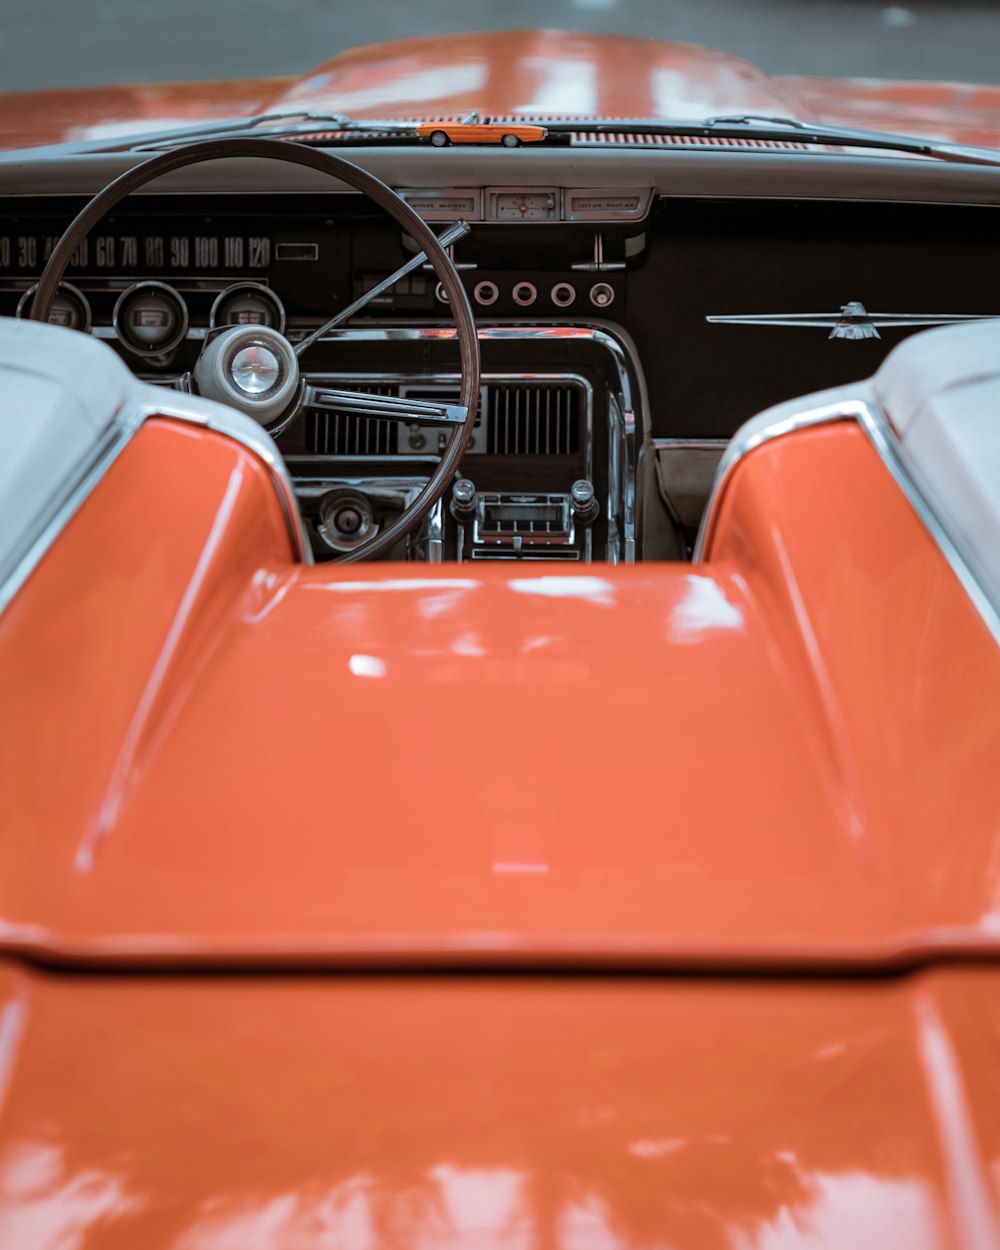 the interior of an orange car with a steering wheel